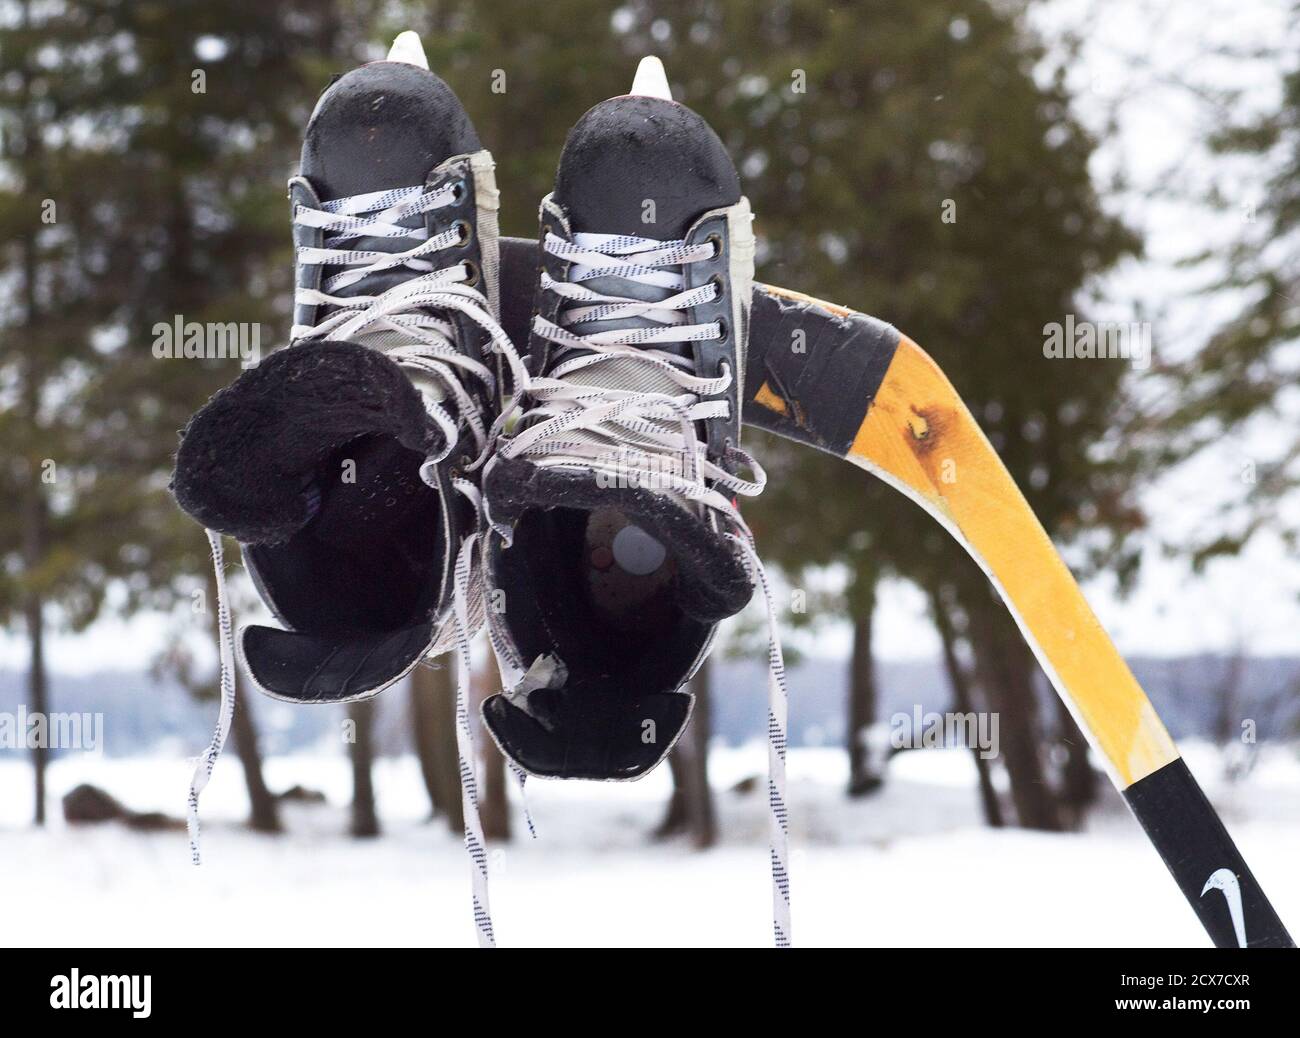 Hockey skates hang from a hockey stick next to a pond hockey rink on Pigeon  Lake in the city of Kawartha Lakes Ontario February 8, 2015. Hockey-mad  Canadians are looking forward to